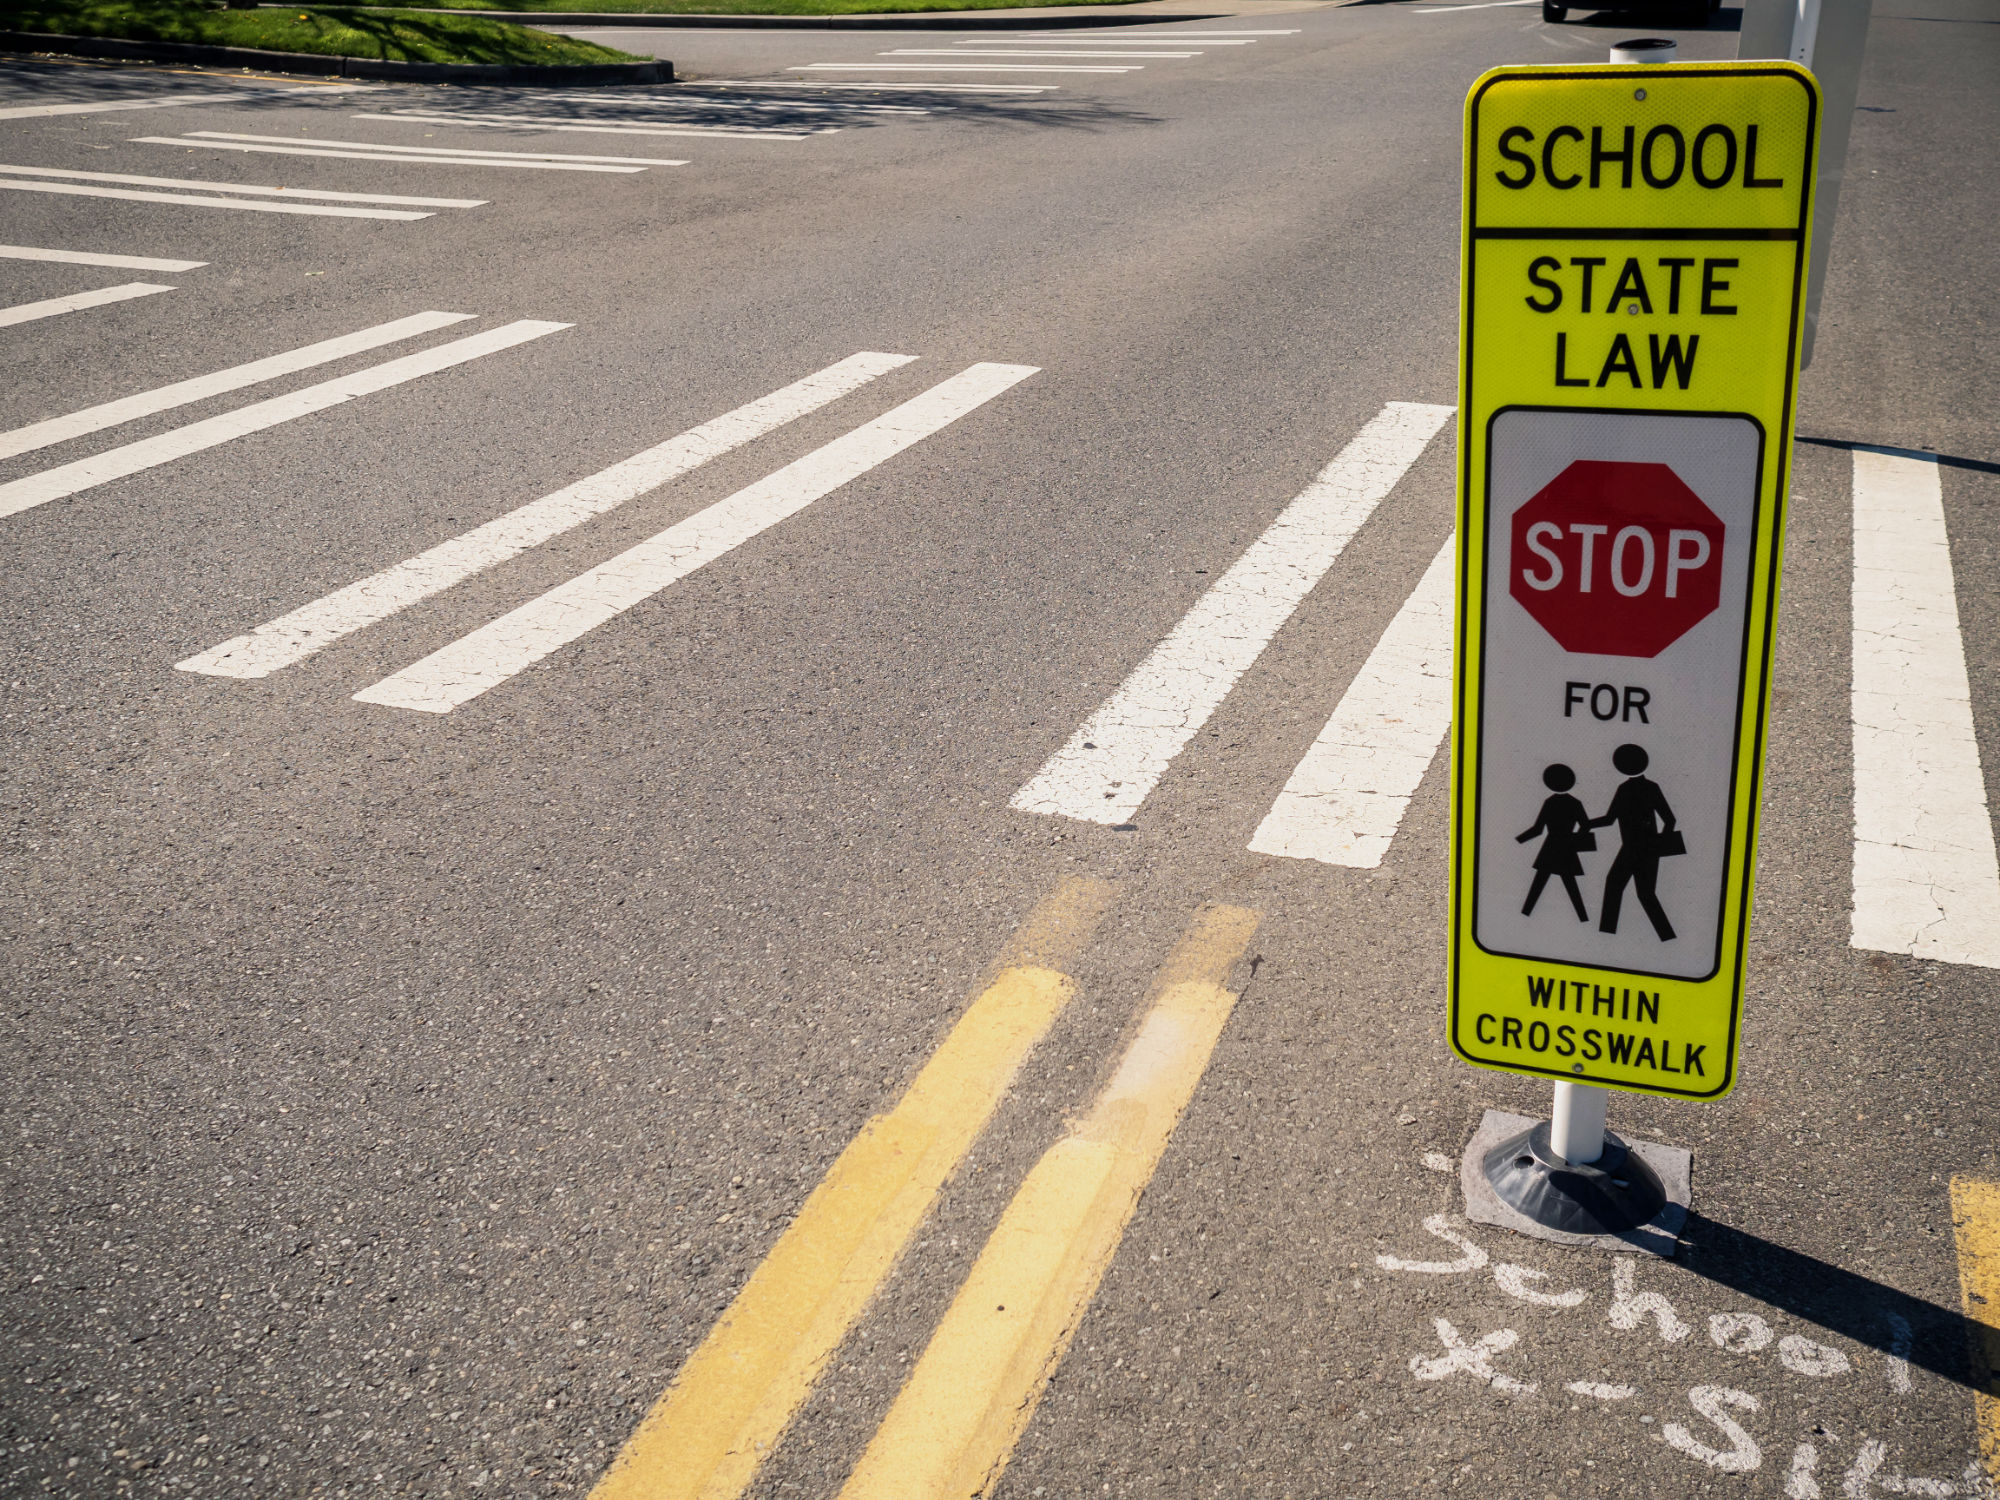 Close up of crosswalk in the street with sign next to it that reads "School - State Law - Stop for Pedestrians with the Crosswalk."